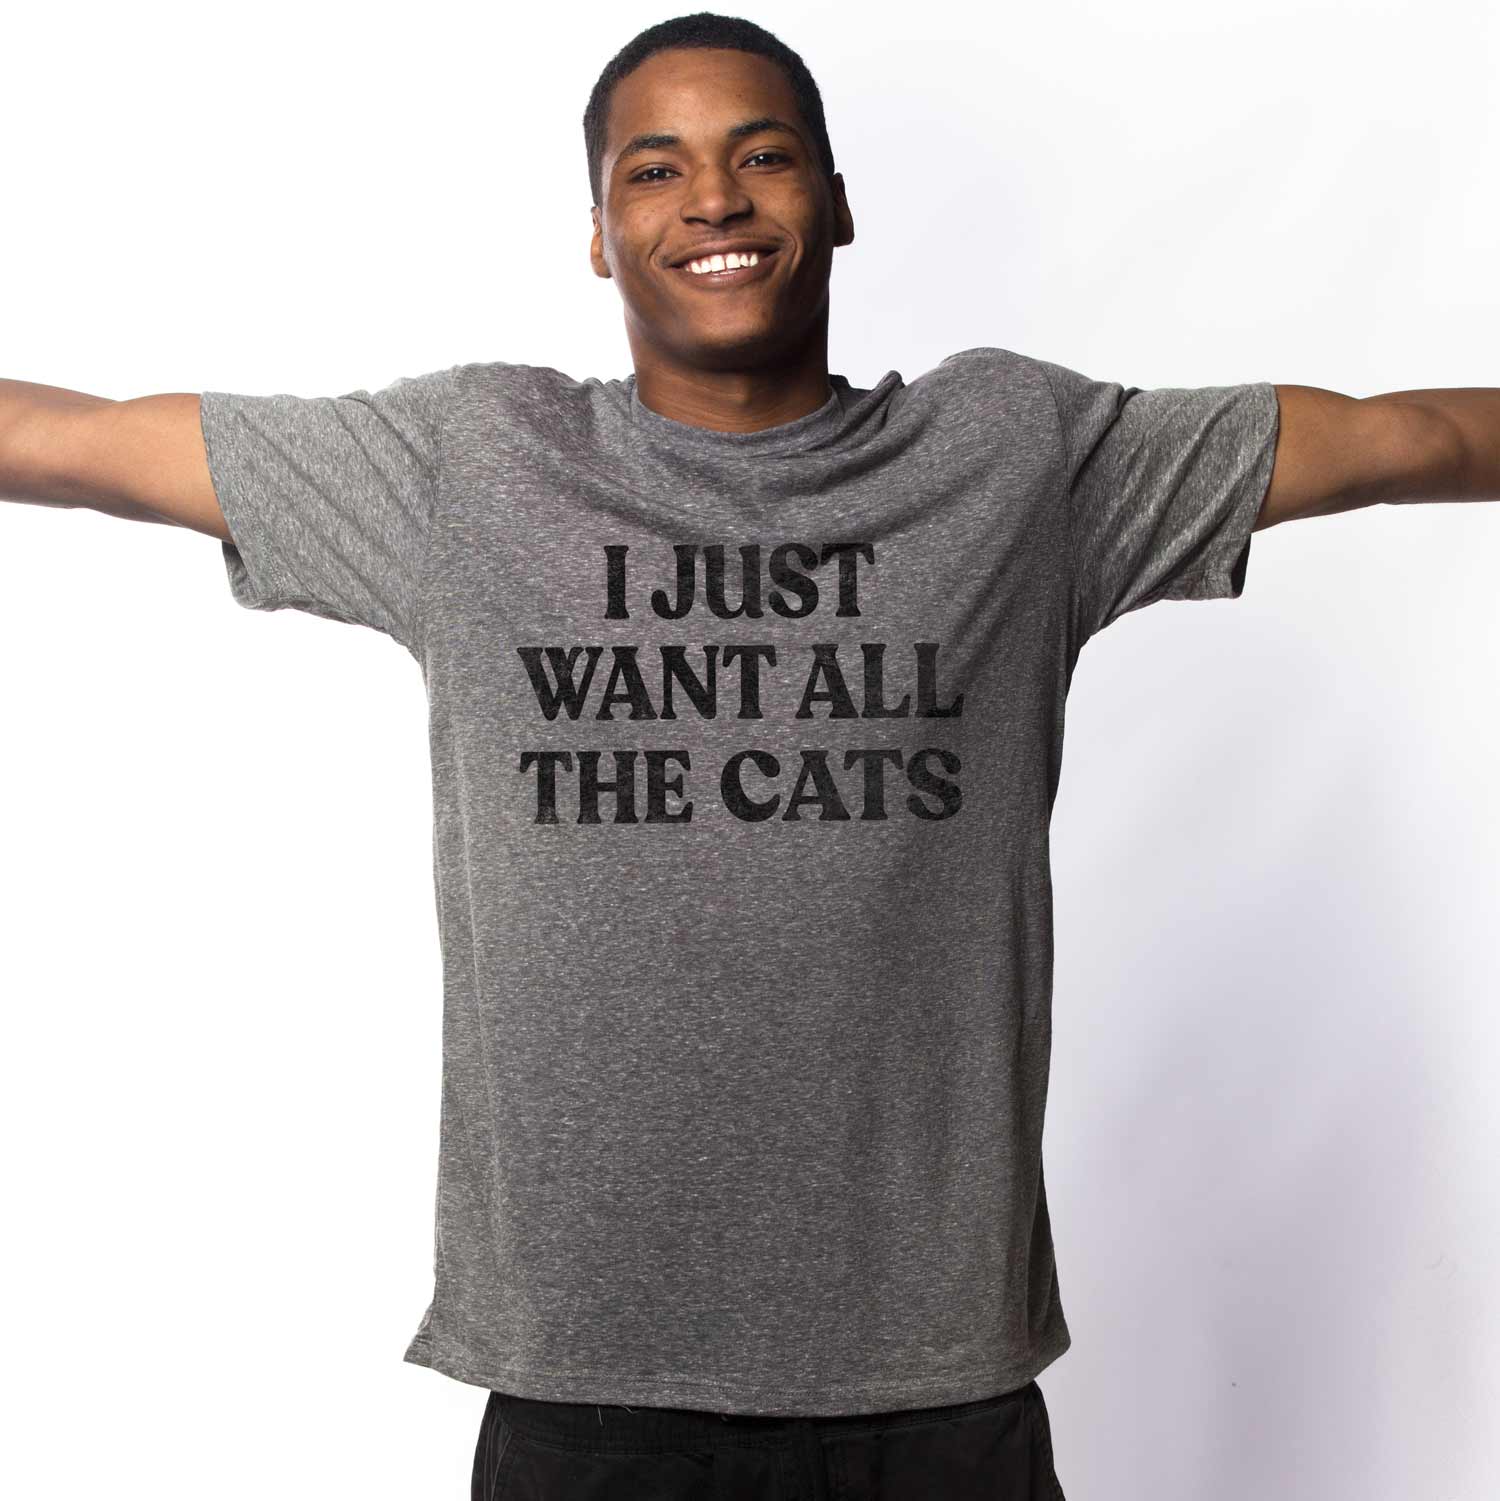 Men's Want All The Cats Vintage Graphic Tee | Funny Animal Triblend T-shirt on Model | Solid Threads